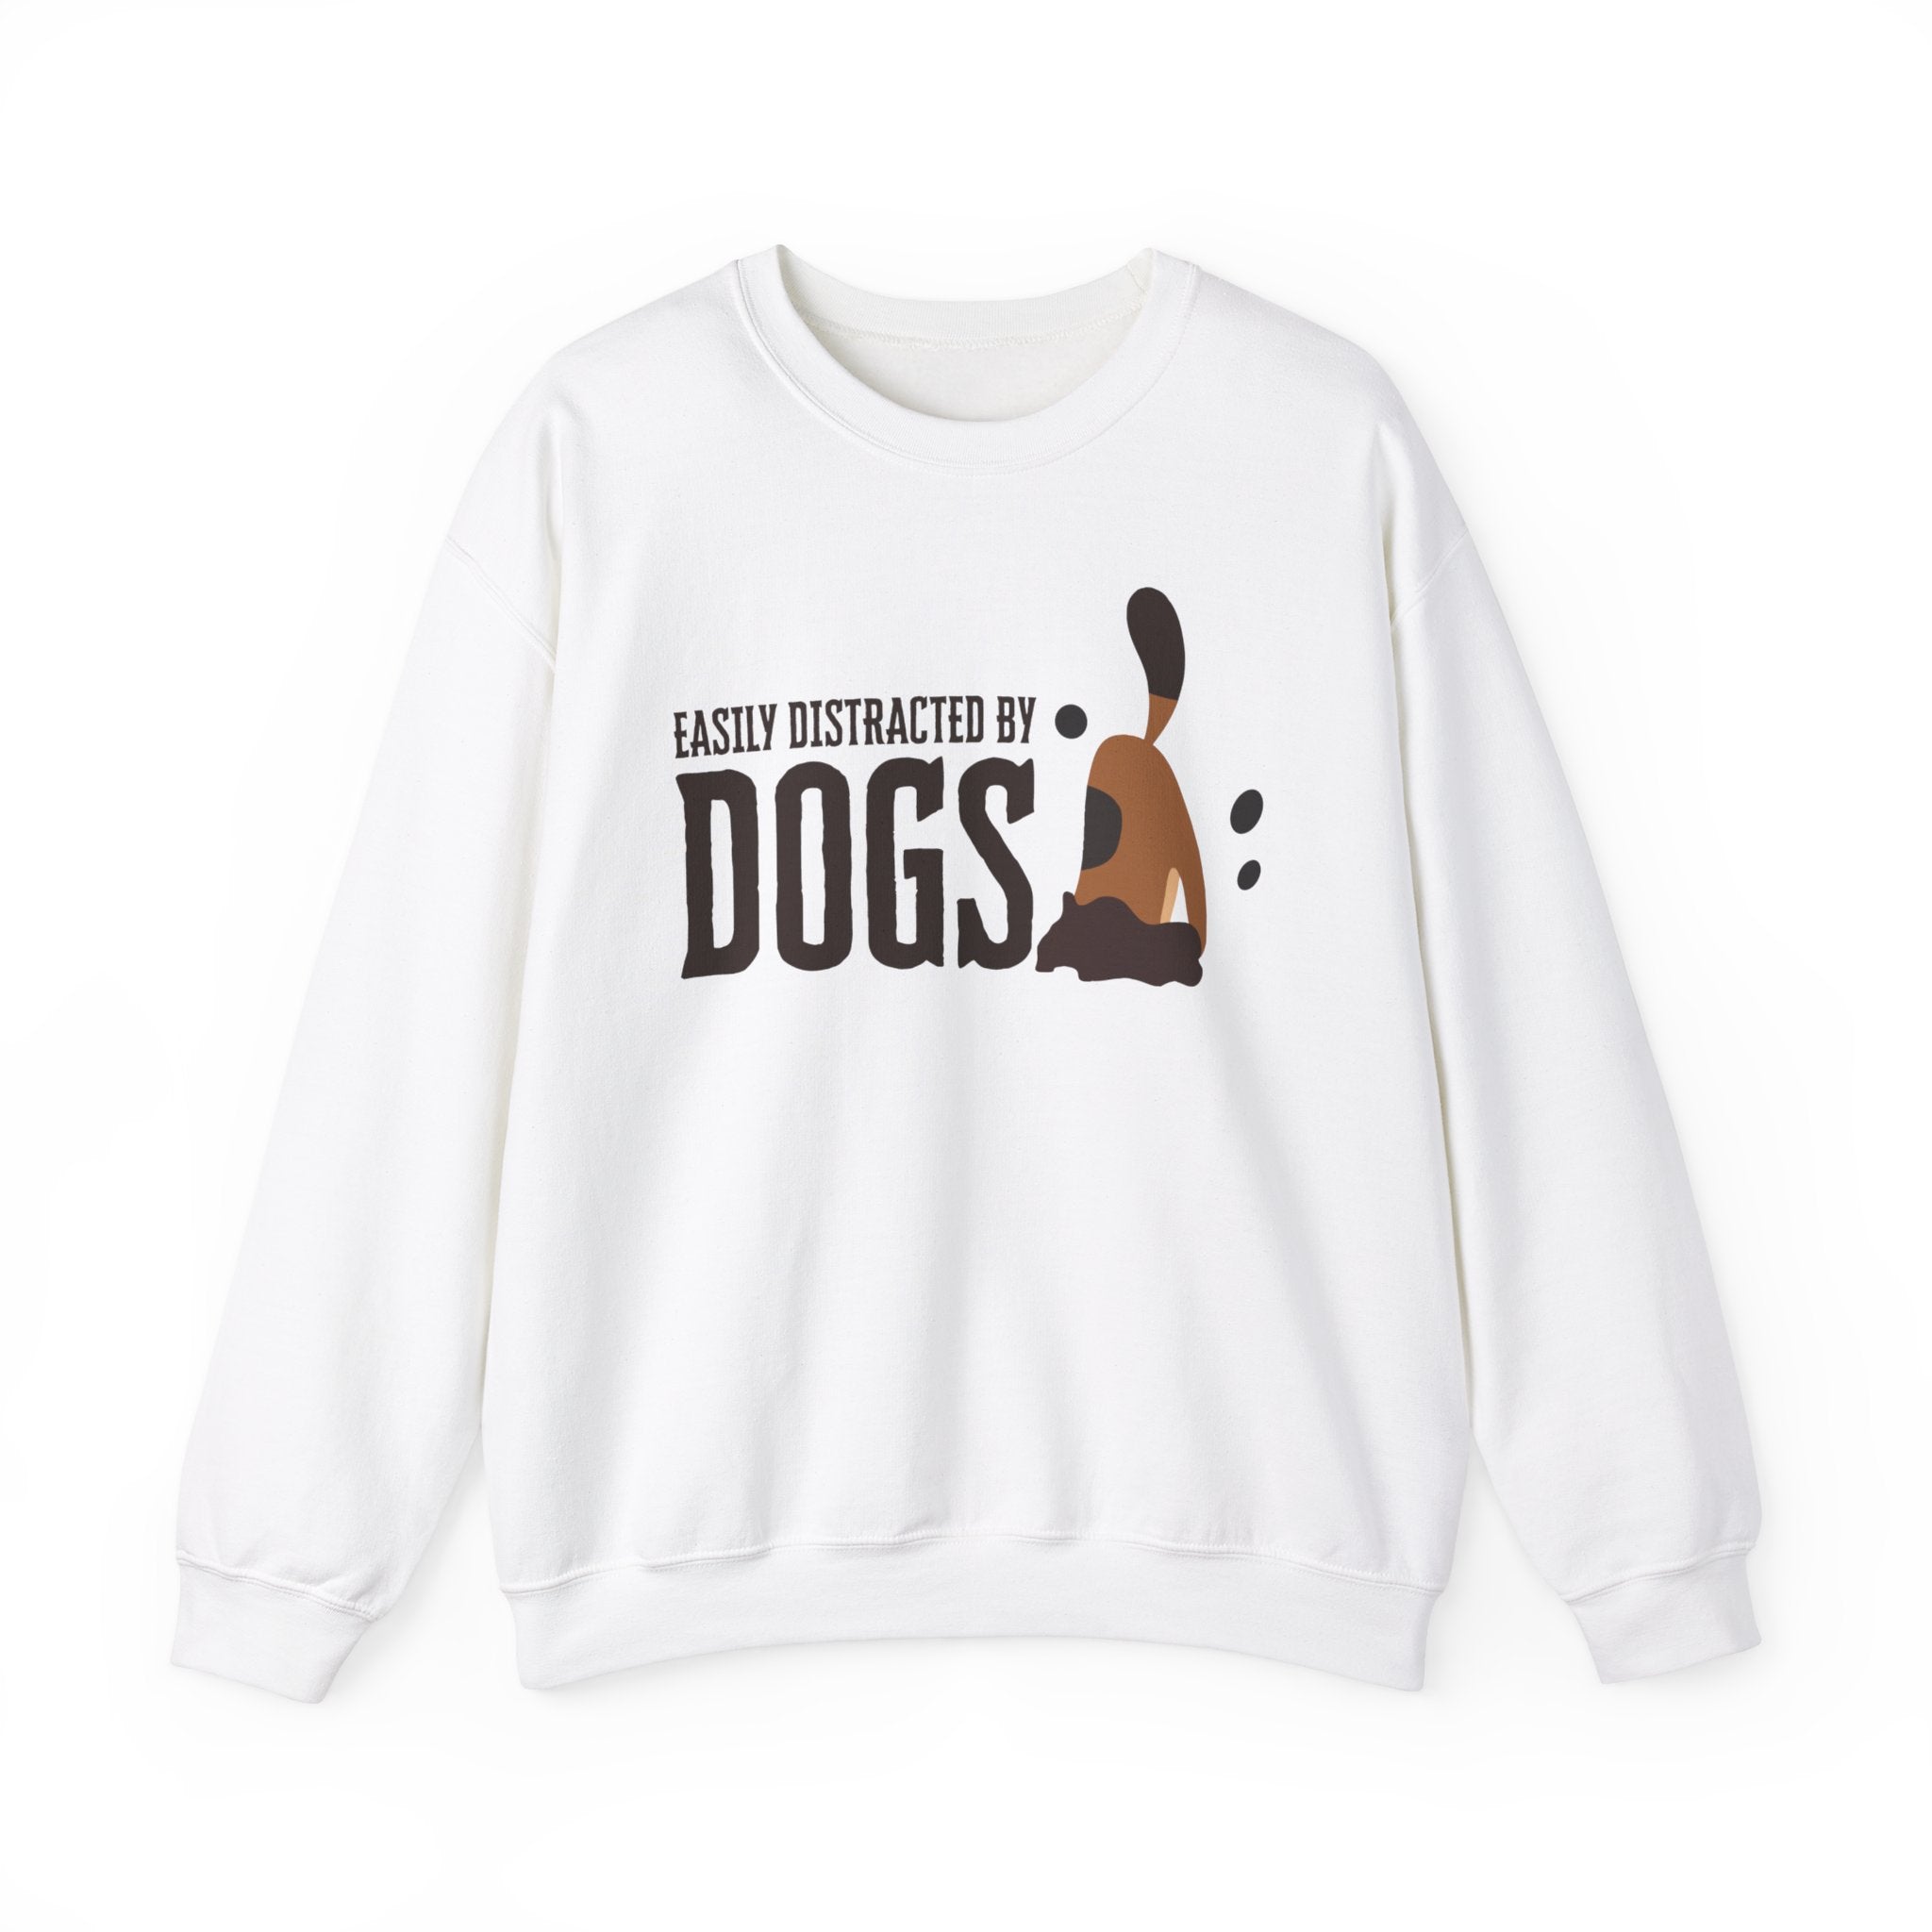 Against a white canvas, a ‘Dogs Pure Love, Dog Dig’ unisex white sweatshirt shows a dog digging with the slogan ‘Easily Distracted by Dogs.’